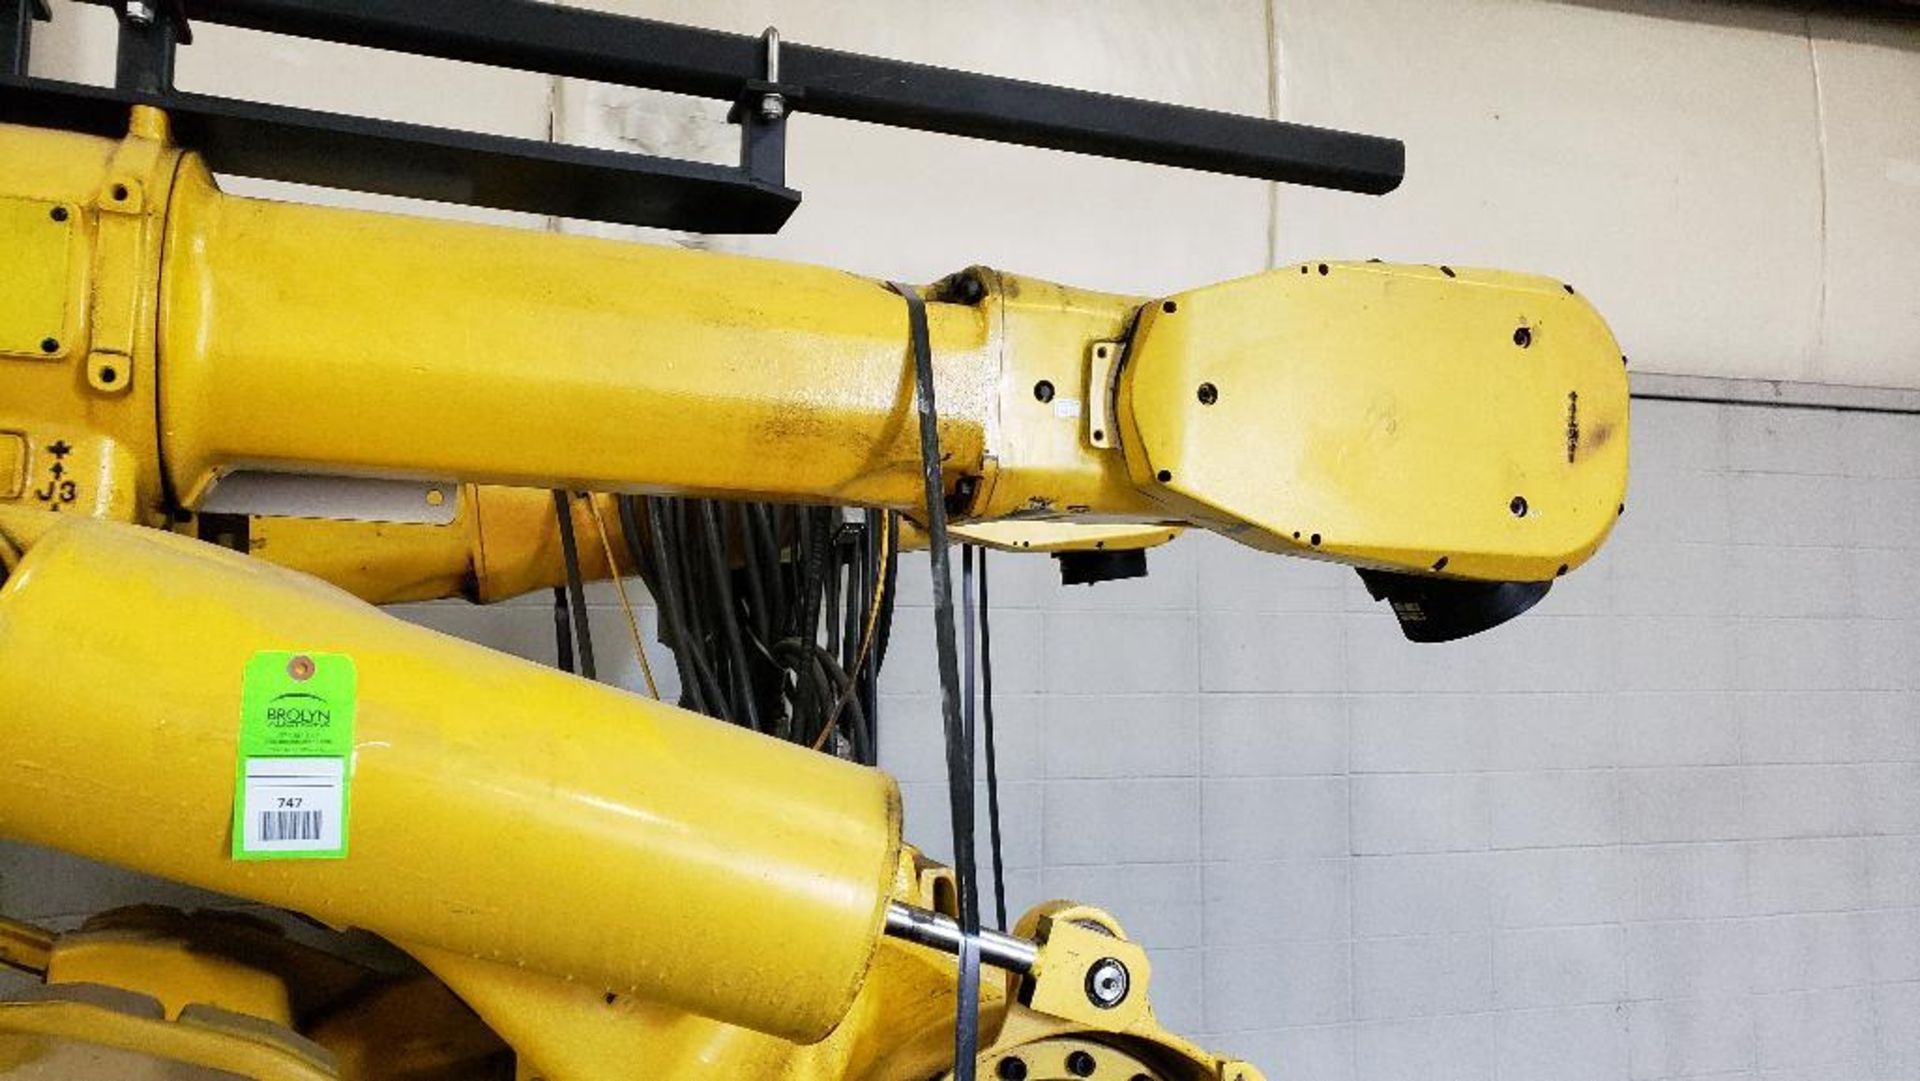 Fanuc S-420iW robot 6-axis arm. - Image 4 of 7